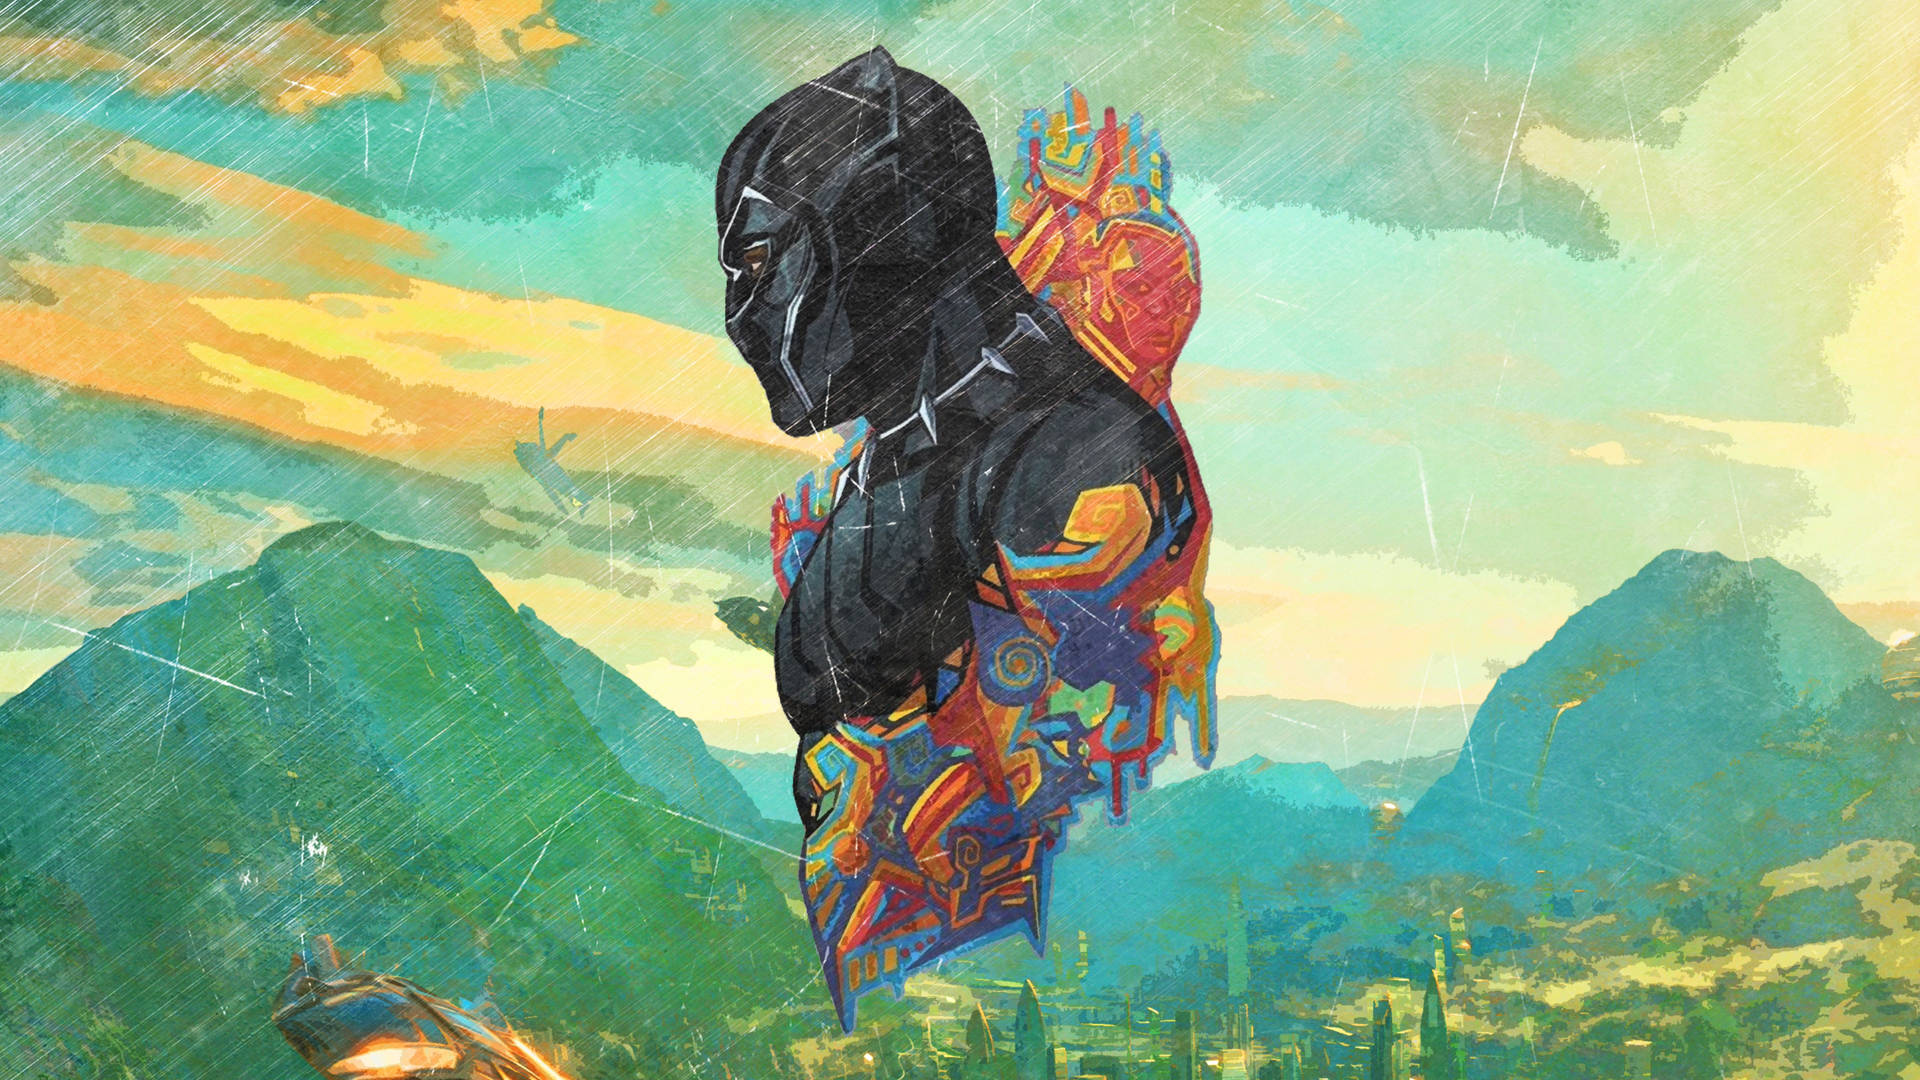 The Black Panther Heroically Standing Amidst Fire